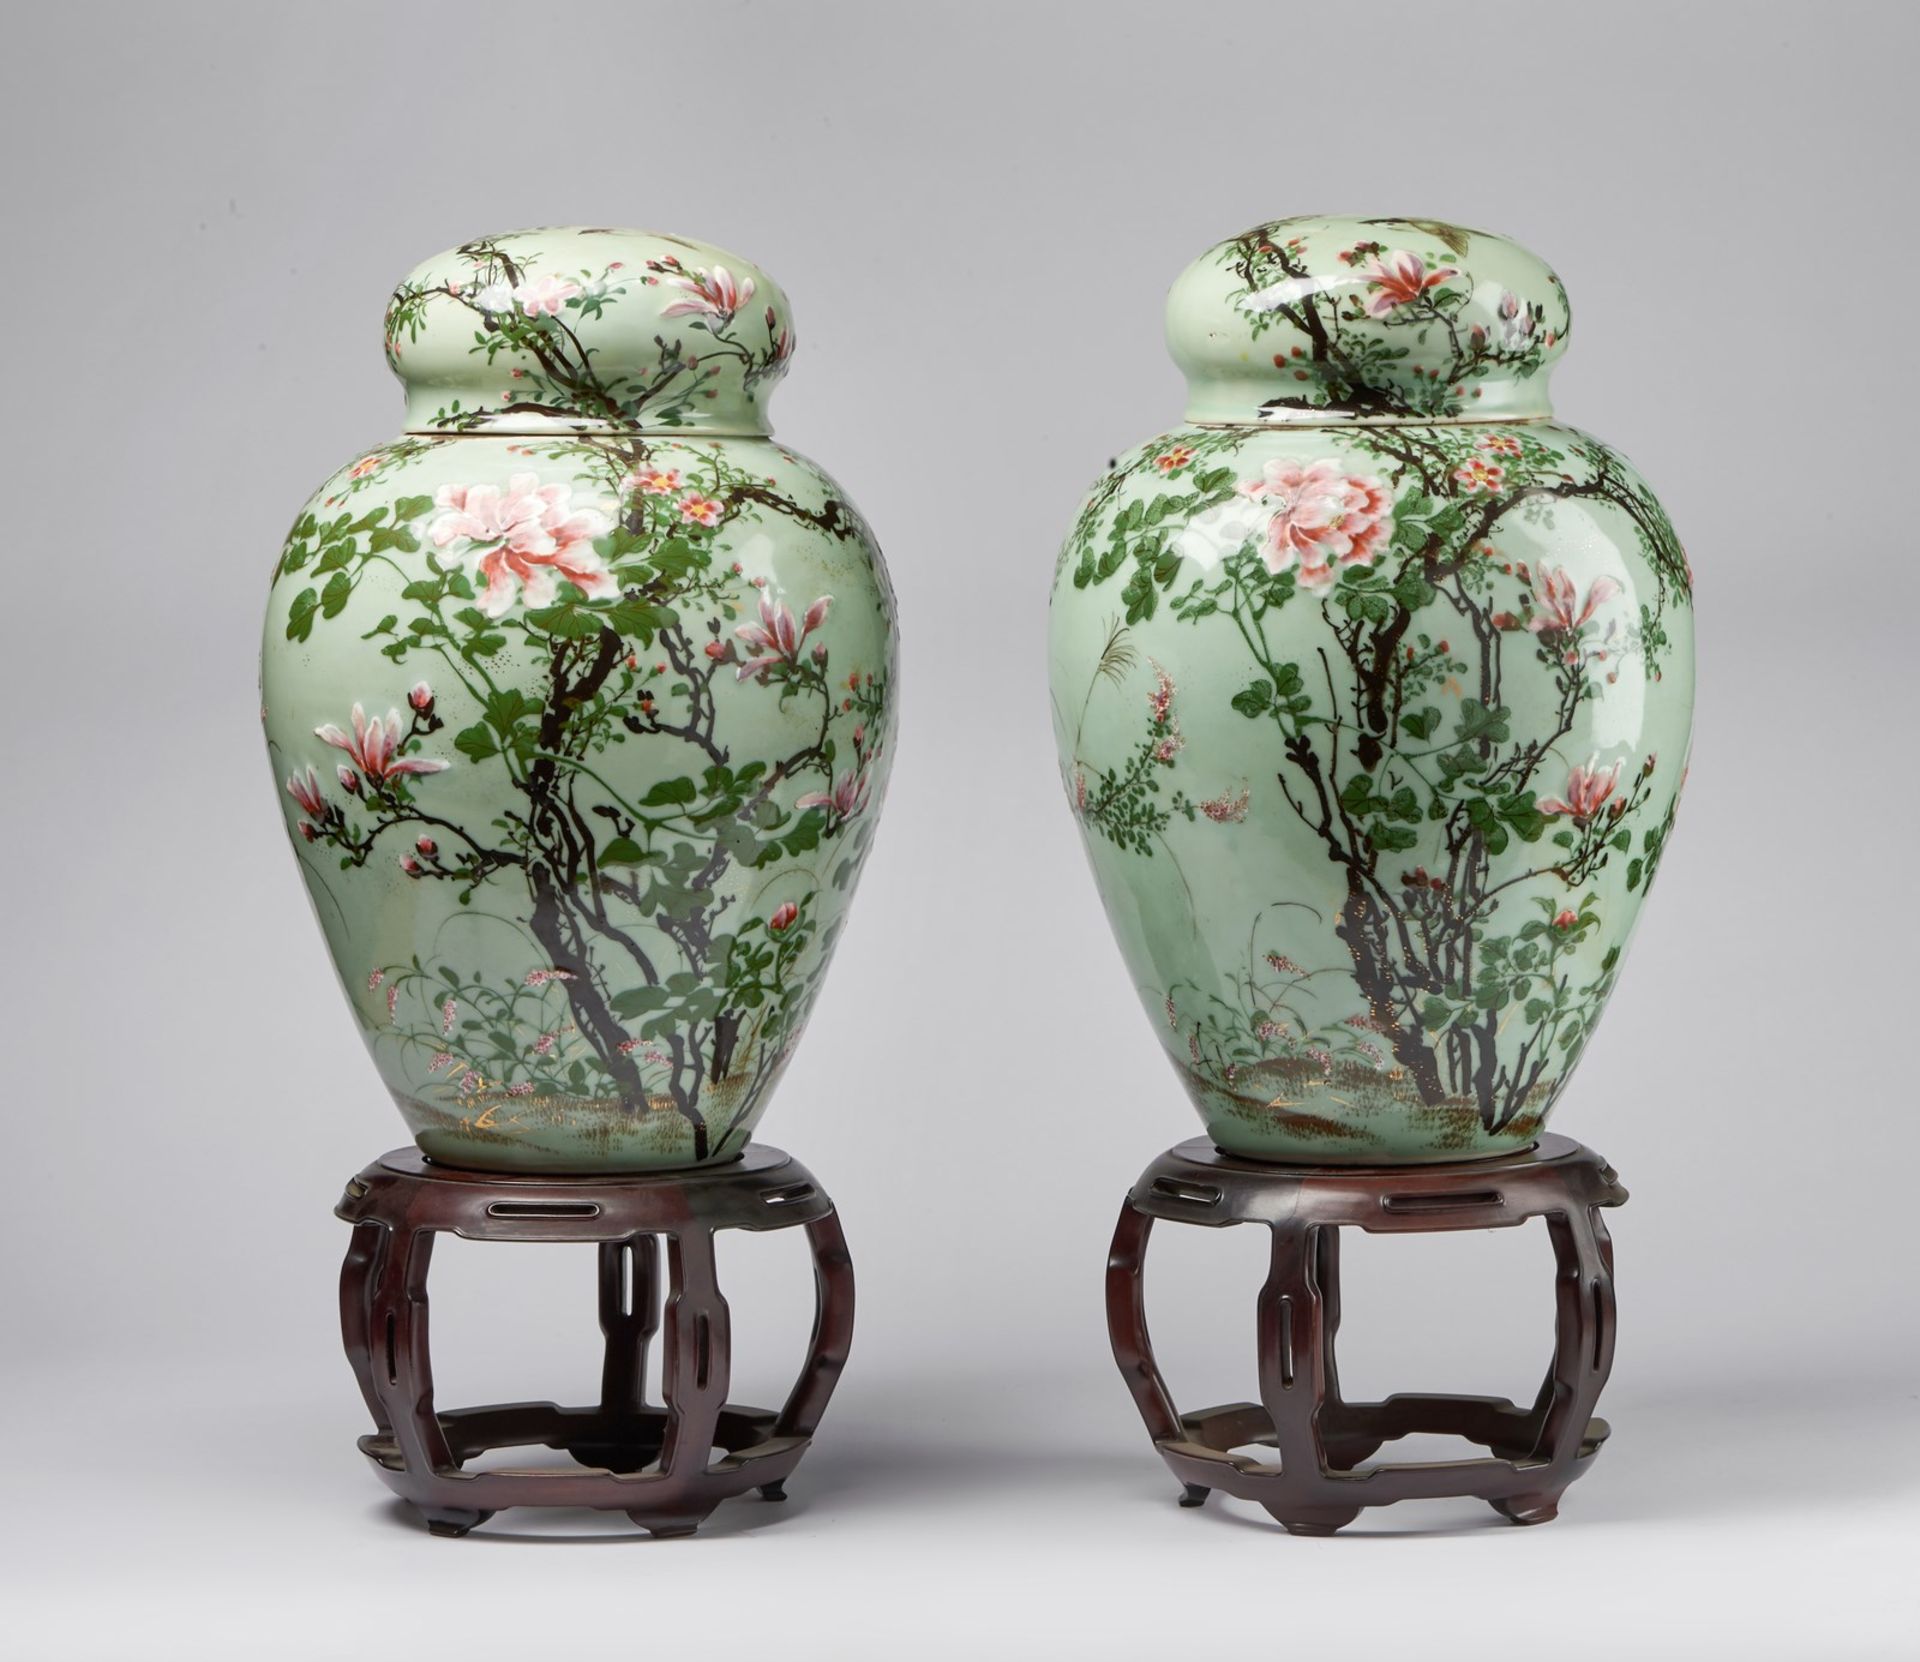 Arte Cinese A pair of porcelain potiches over celadon groundChina, early 20th century .